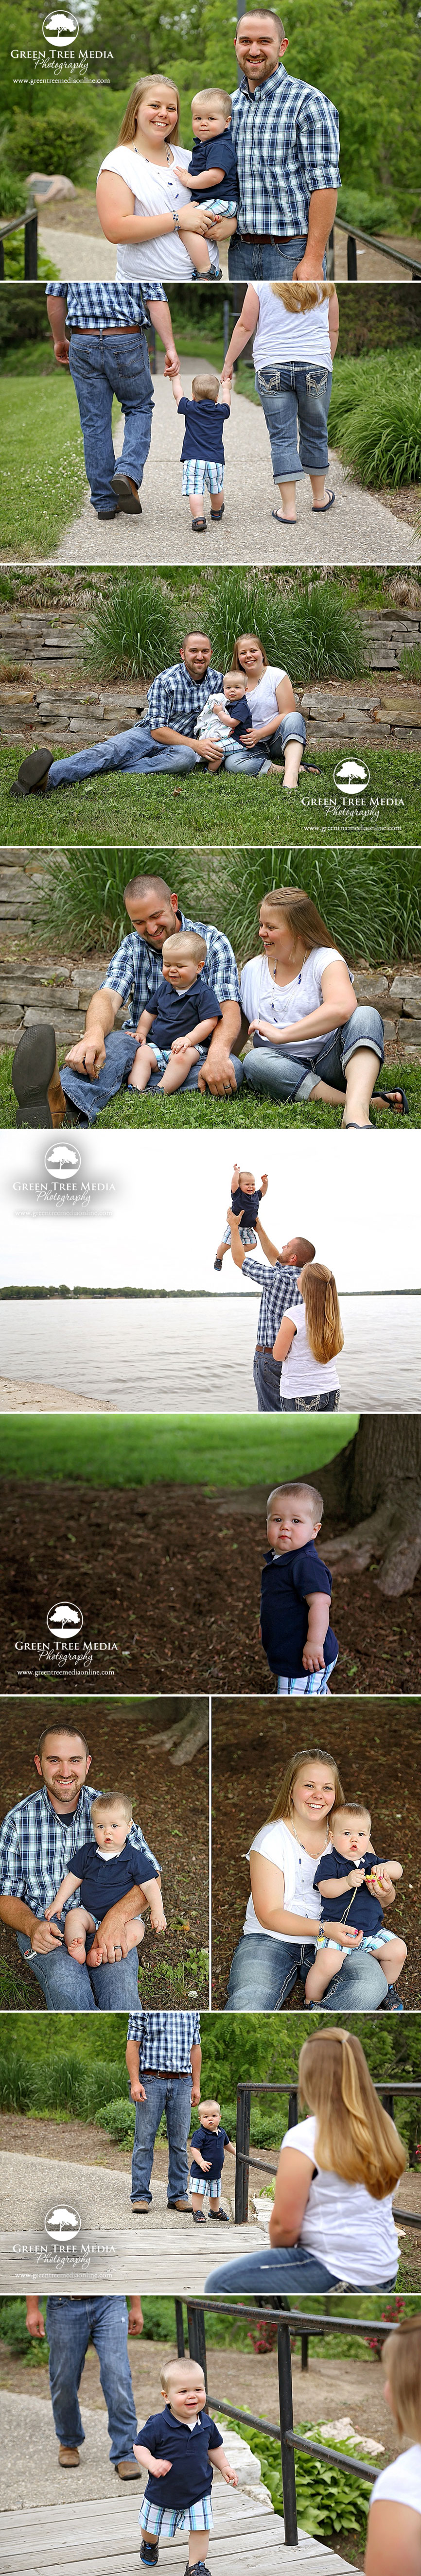 Wulff Family Photography